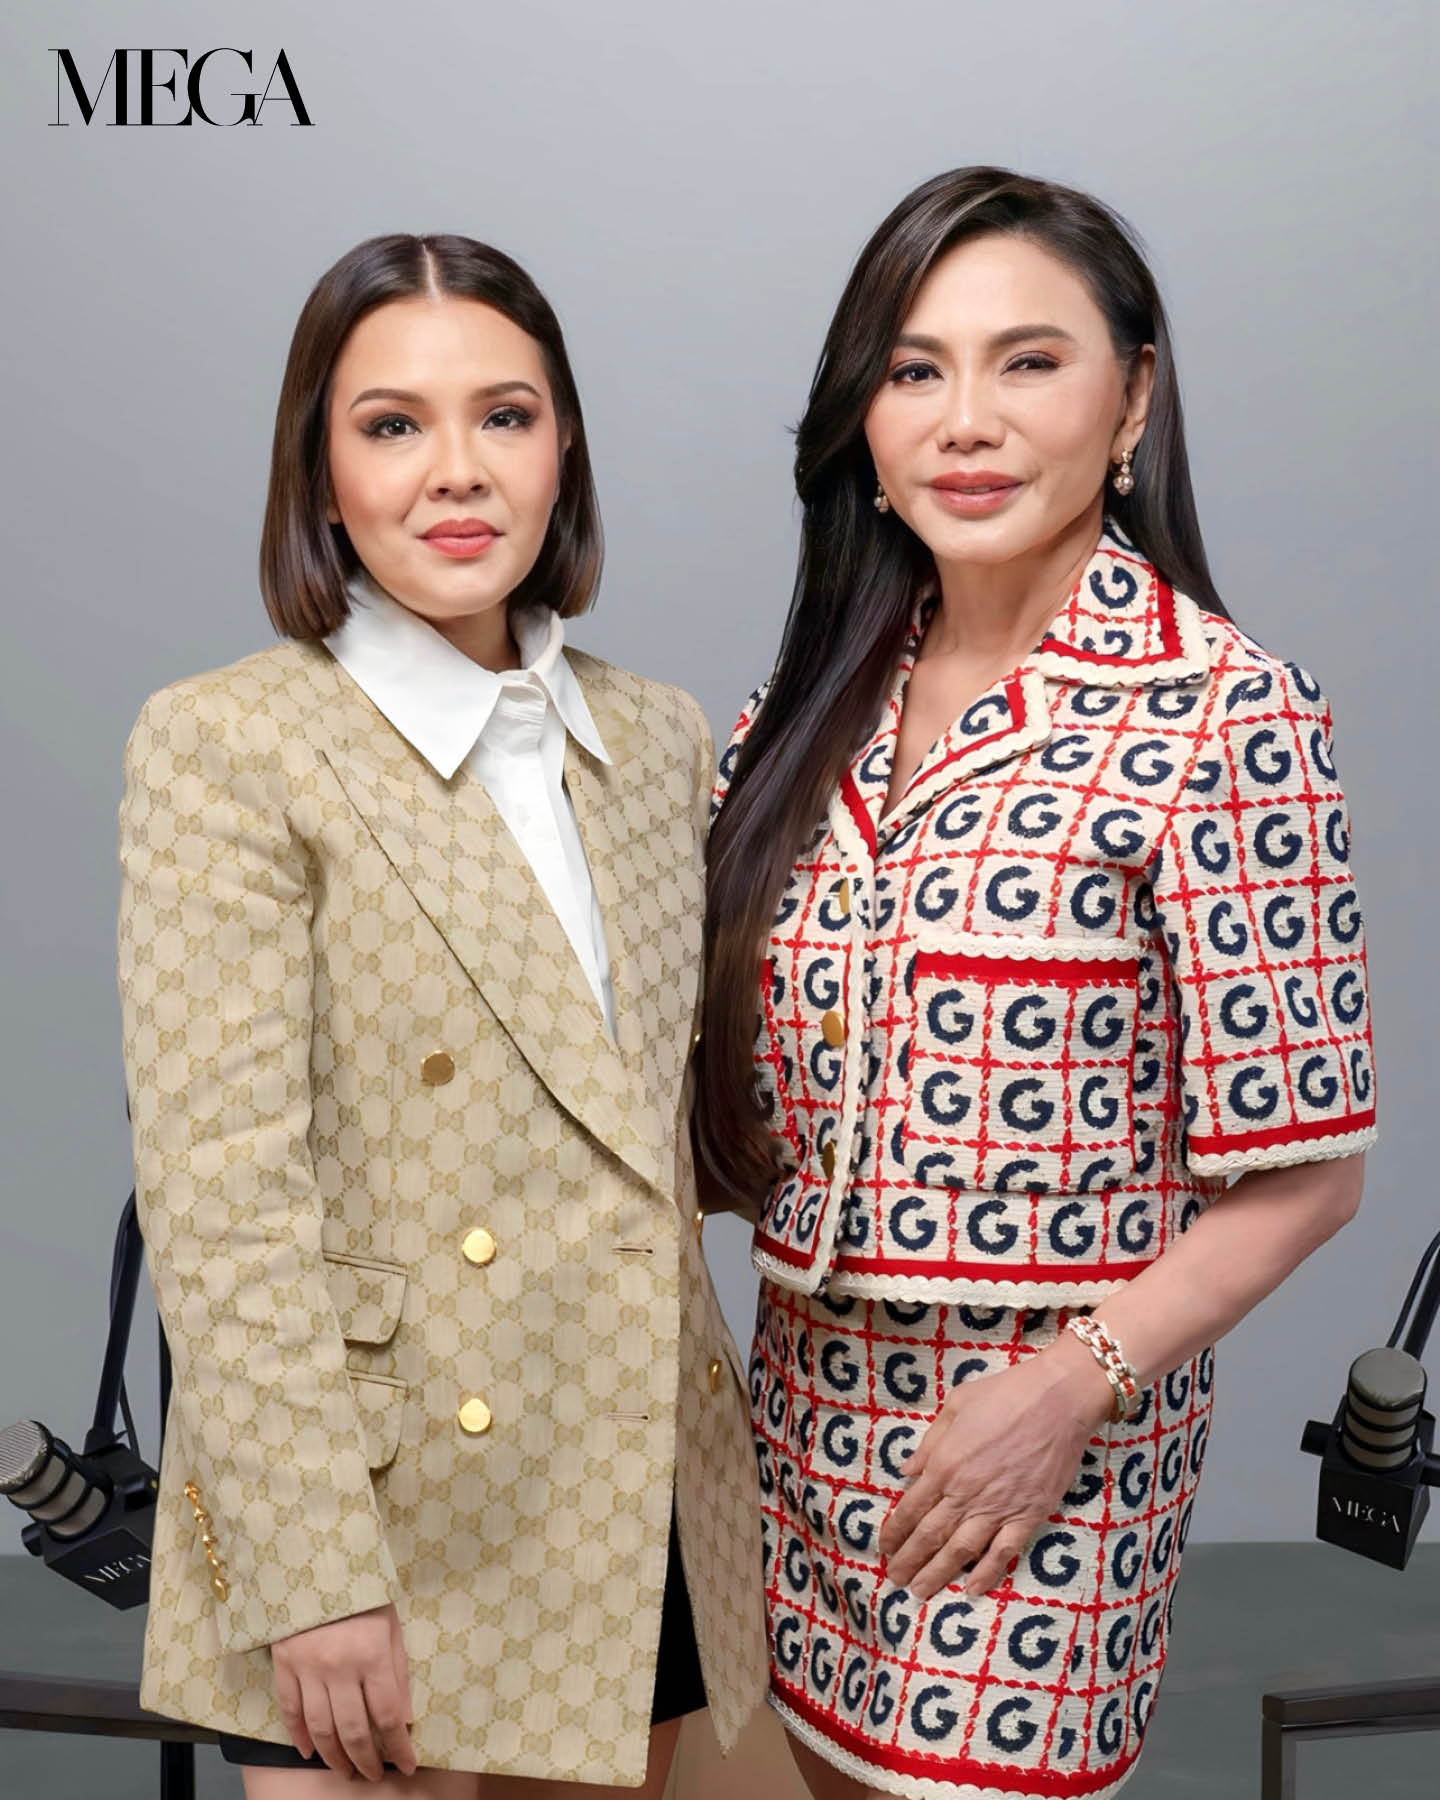 MEGA Magazine Editor-in-Chief Peewee Reyes-Isidro with multi-hyphenate Dr. Vicki Belo on the set of MEGA: The Next Move